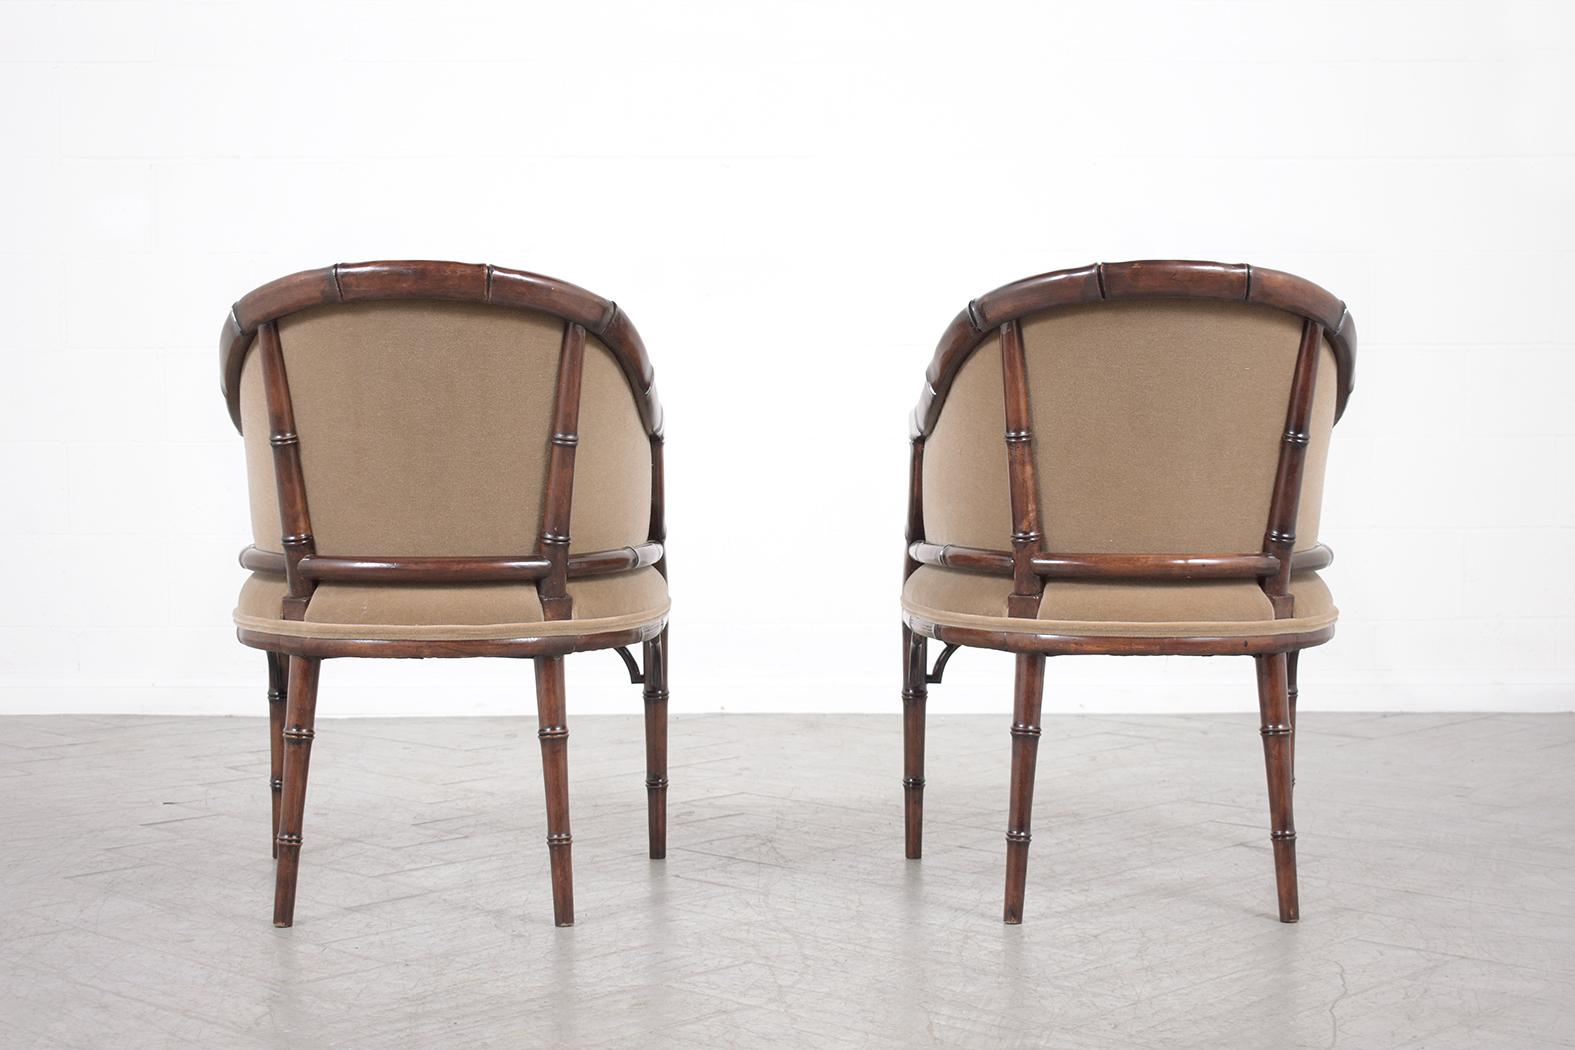 Elegant Vintage Hollywood Regency Armchairs: Bamboo-Carved and Newly Refurbished For Sale 6